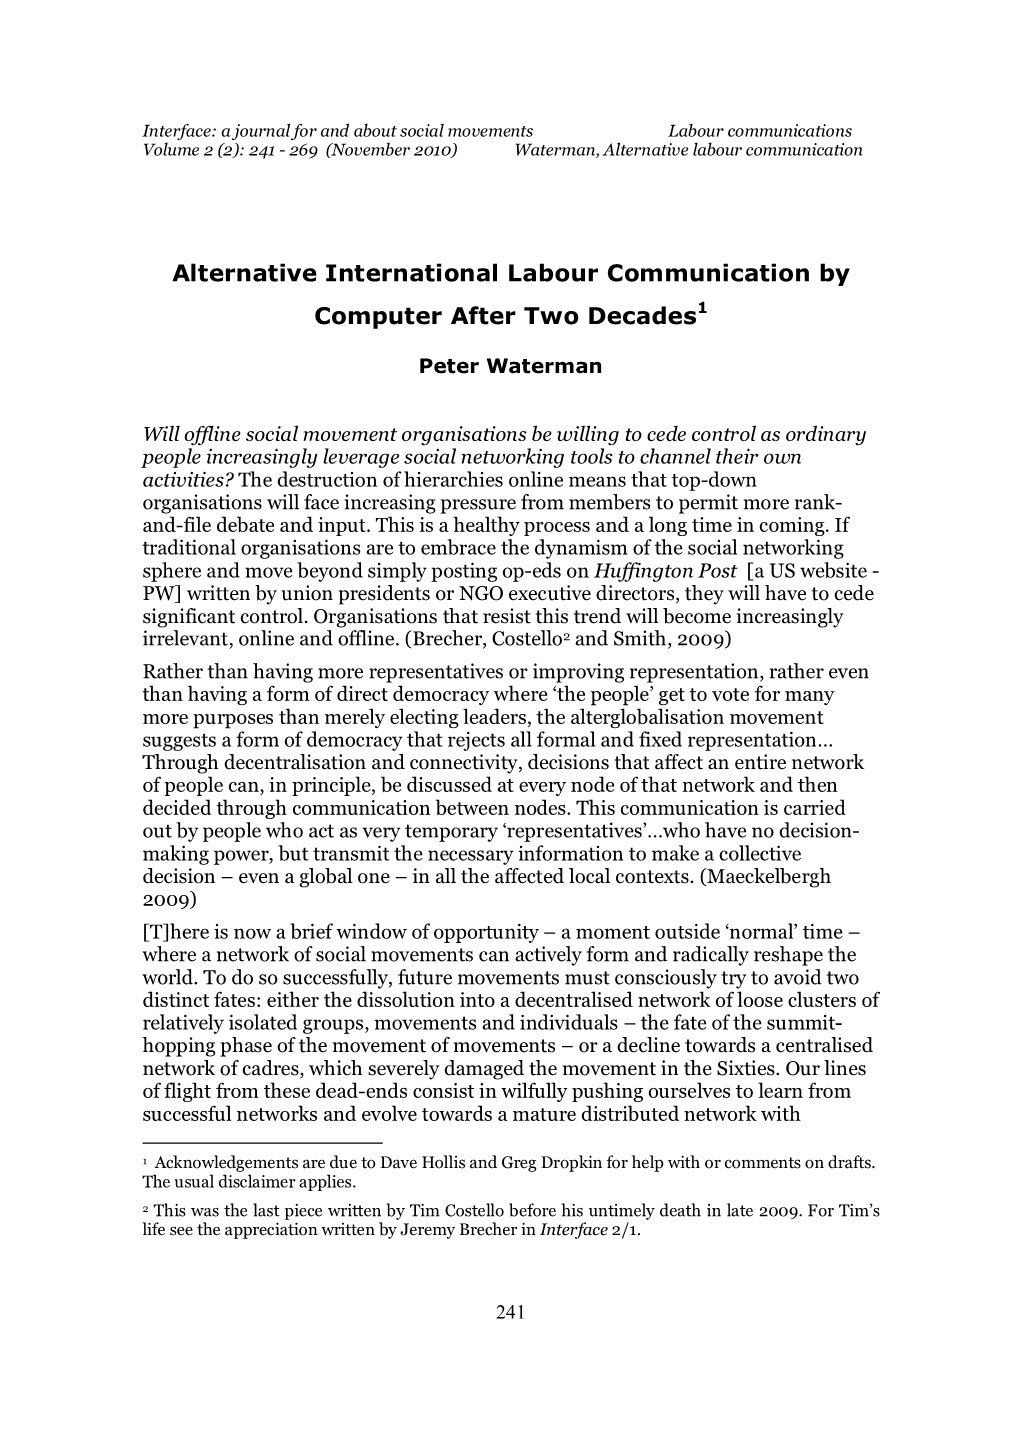 Alternative International Labour Communication by Computer After Two Decades1